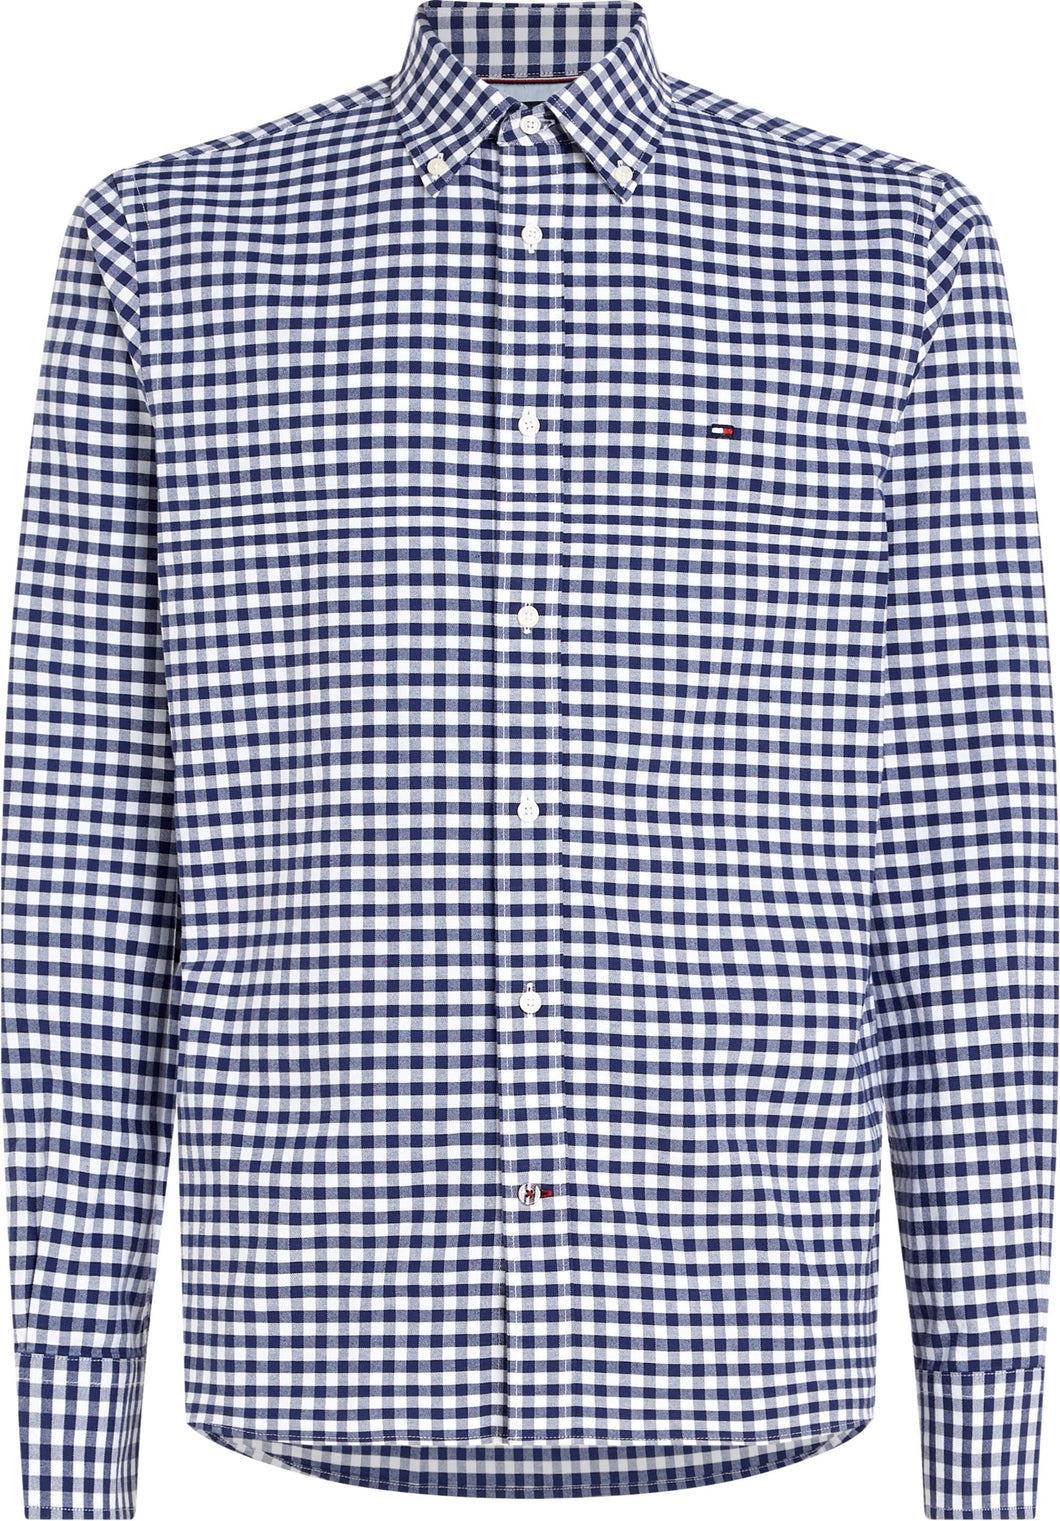 Tommy Hilfiger Oxford Check